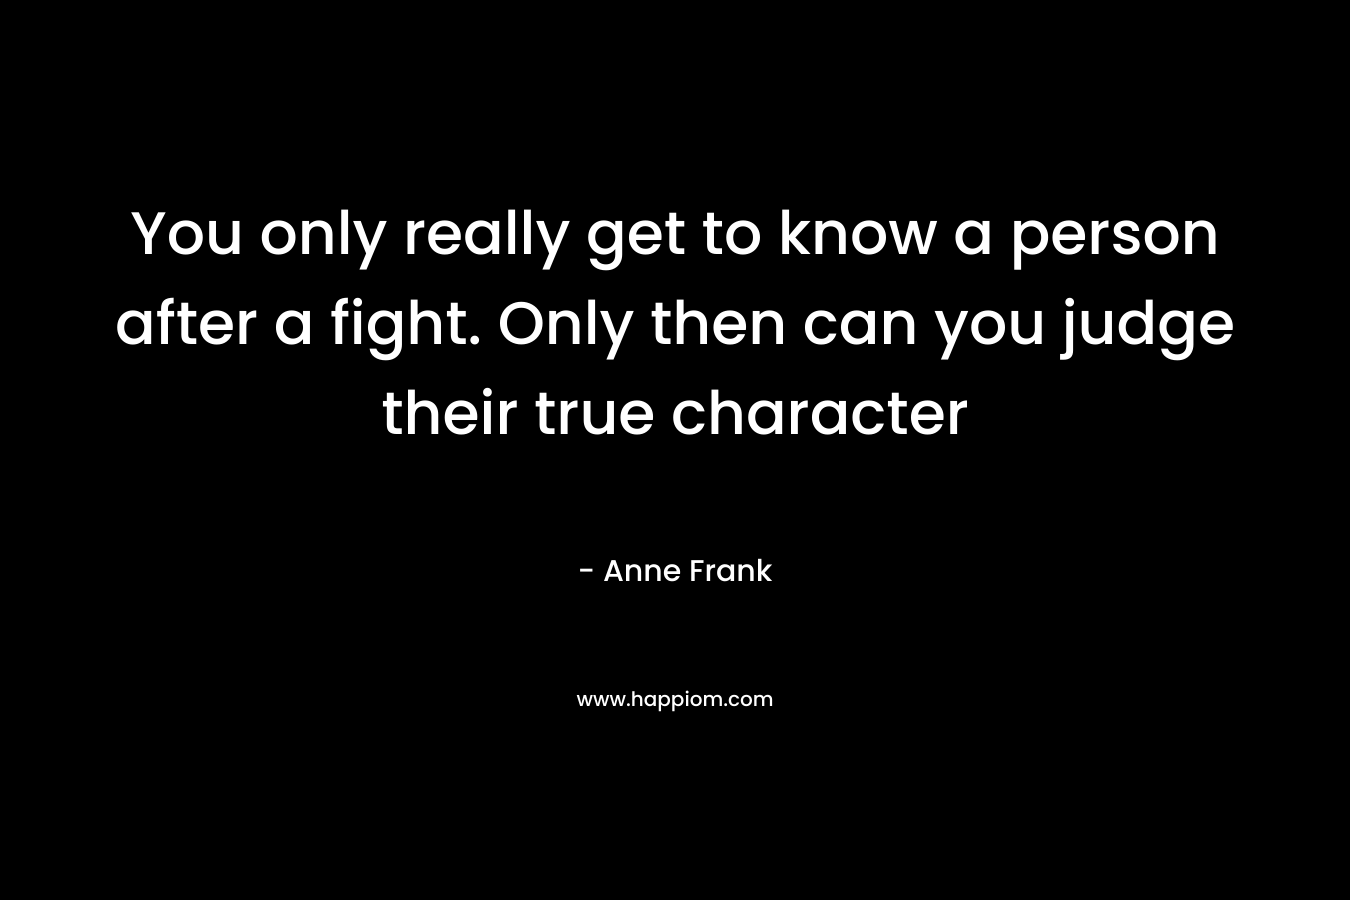 You only really get to know a person after a fight. Only then can you judge their true character